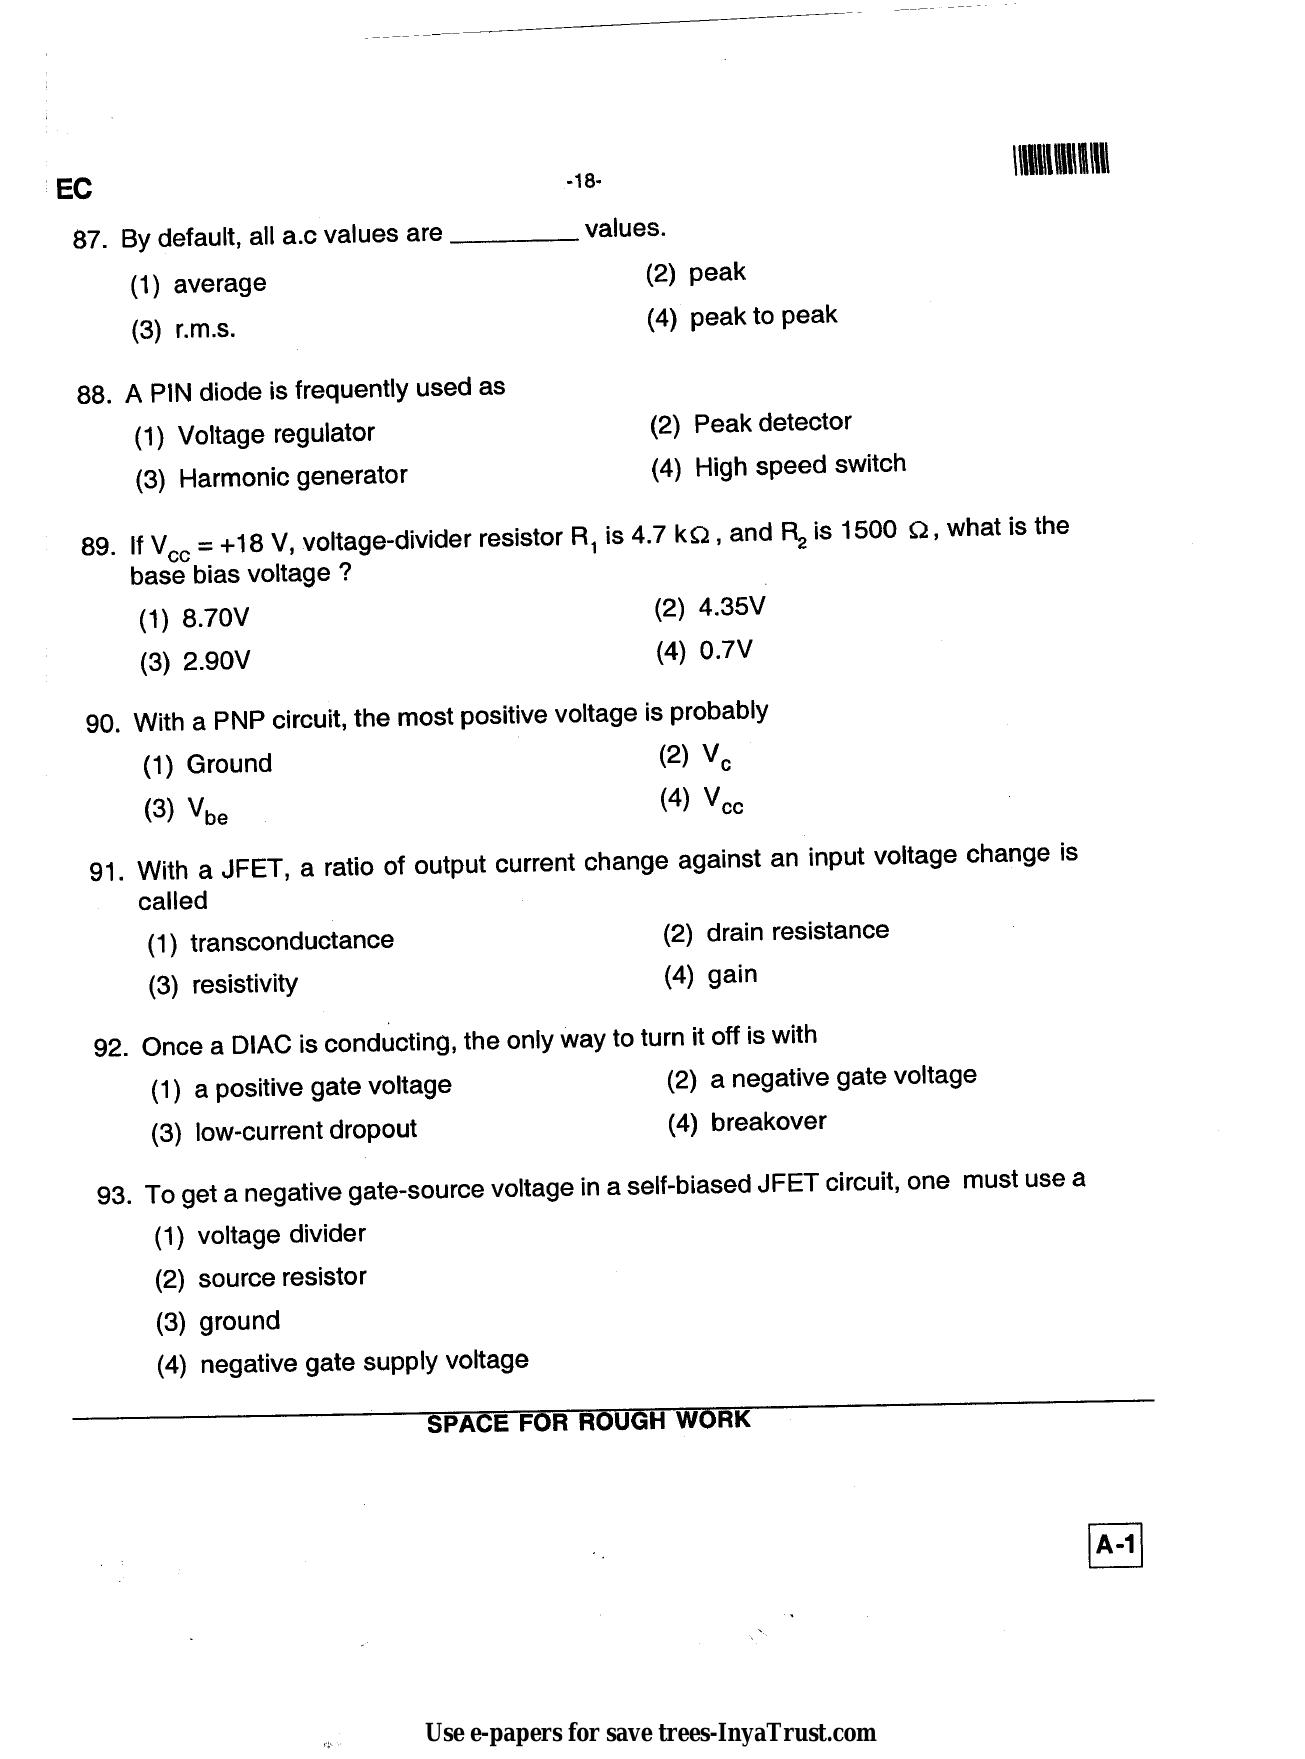 Karnataka Diploma CET- 2013 Electronics and Communication Engineering Question Paper - Page 18